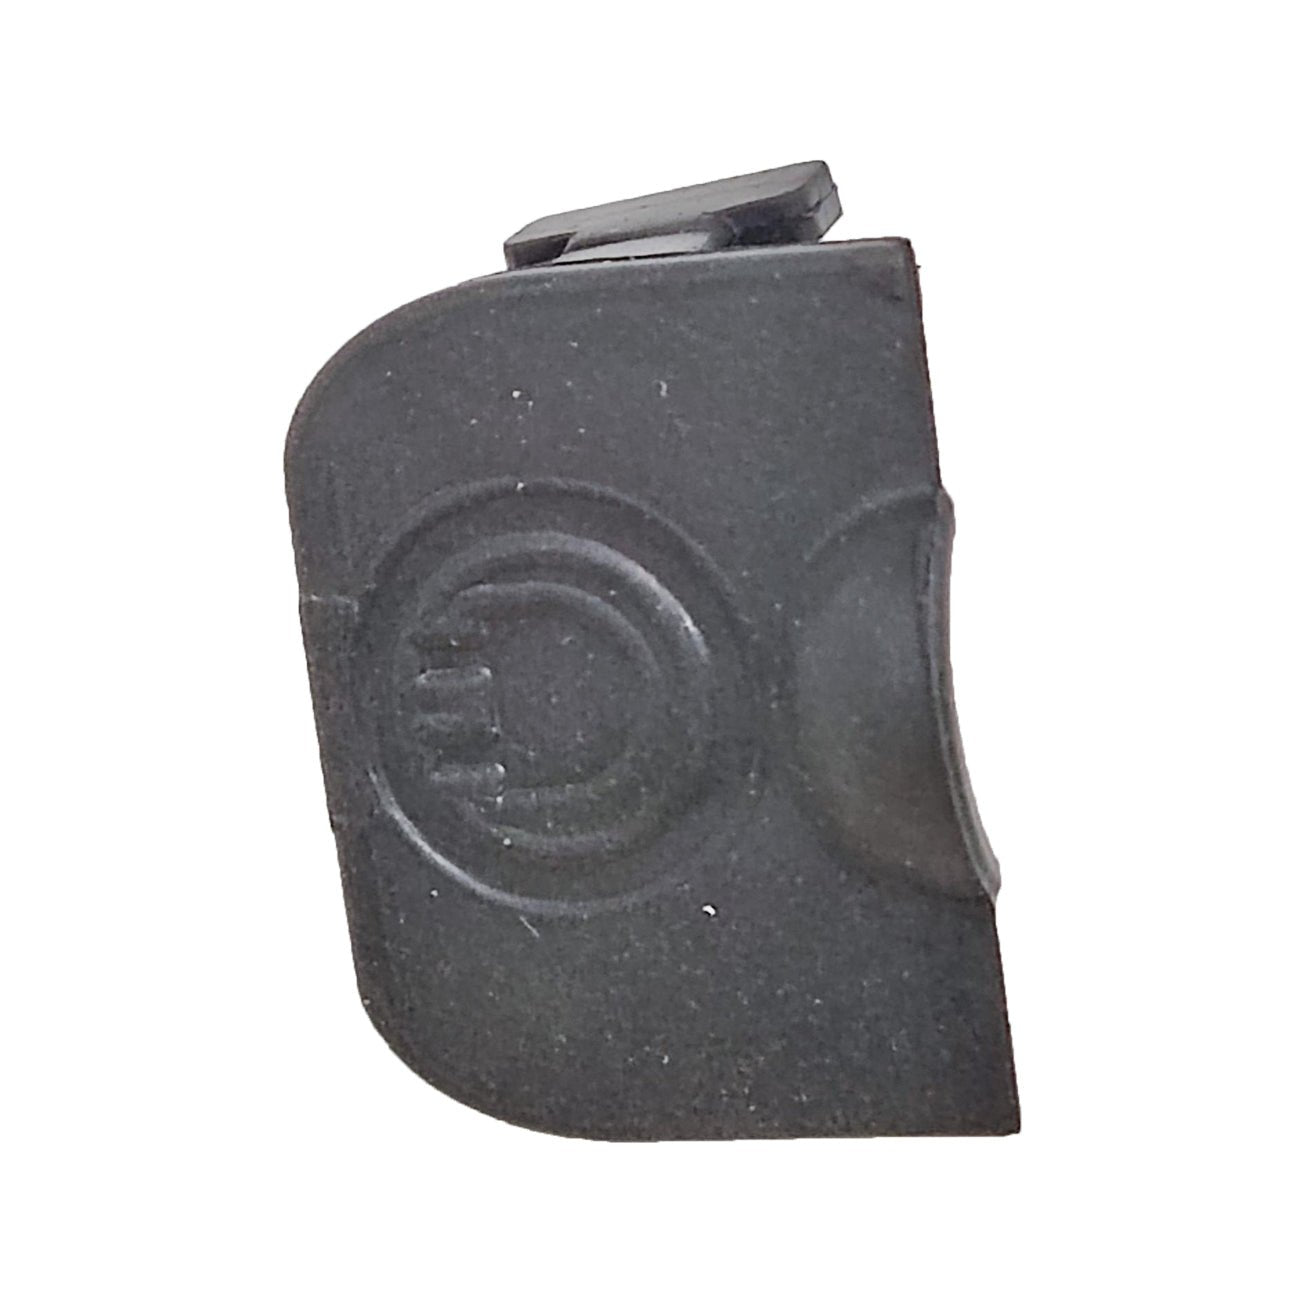 G4 Charge Port Seal - GOTRAX